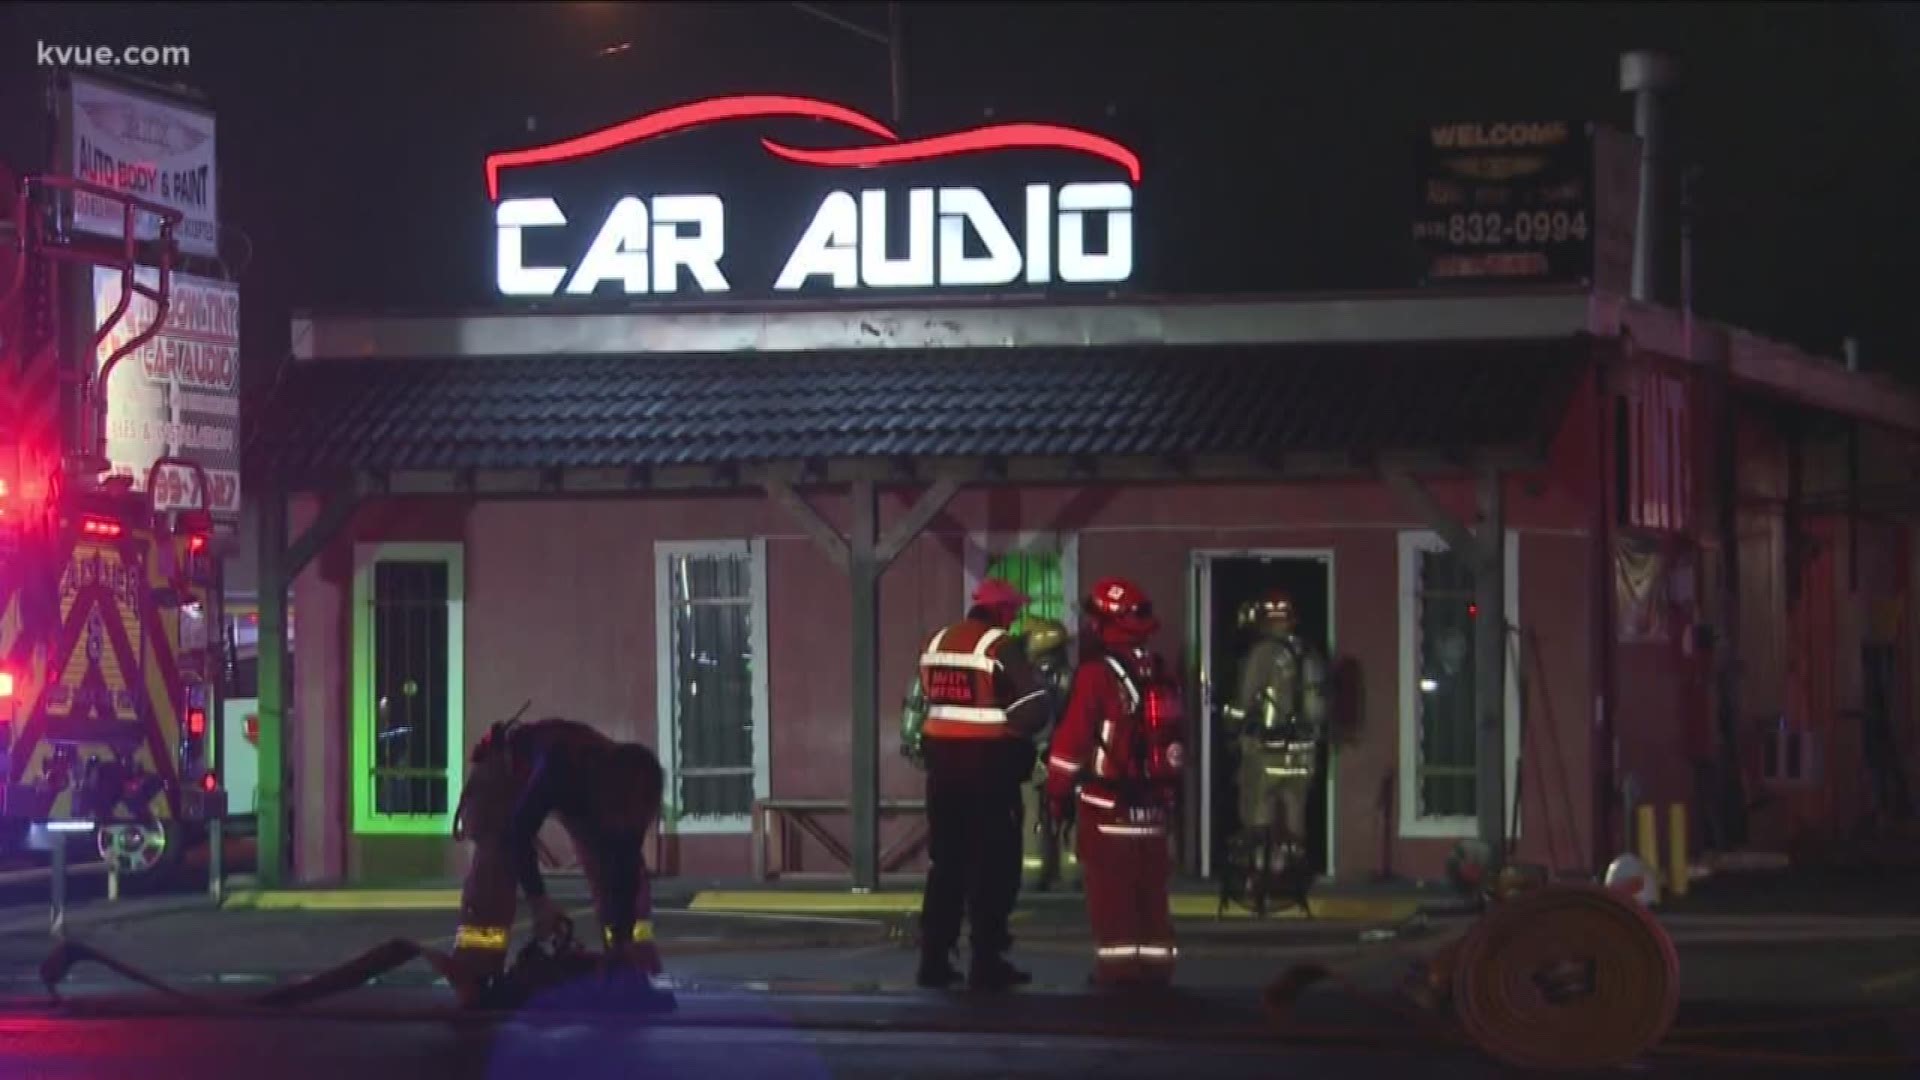 One of those fires was started Saturday night at JC's Car Audio on North Lamar.